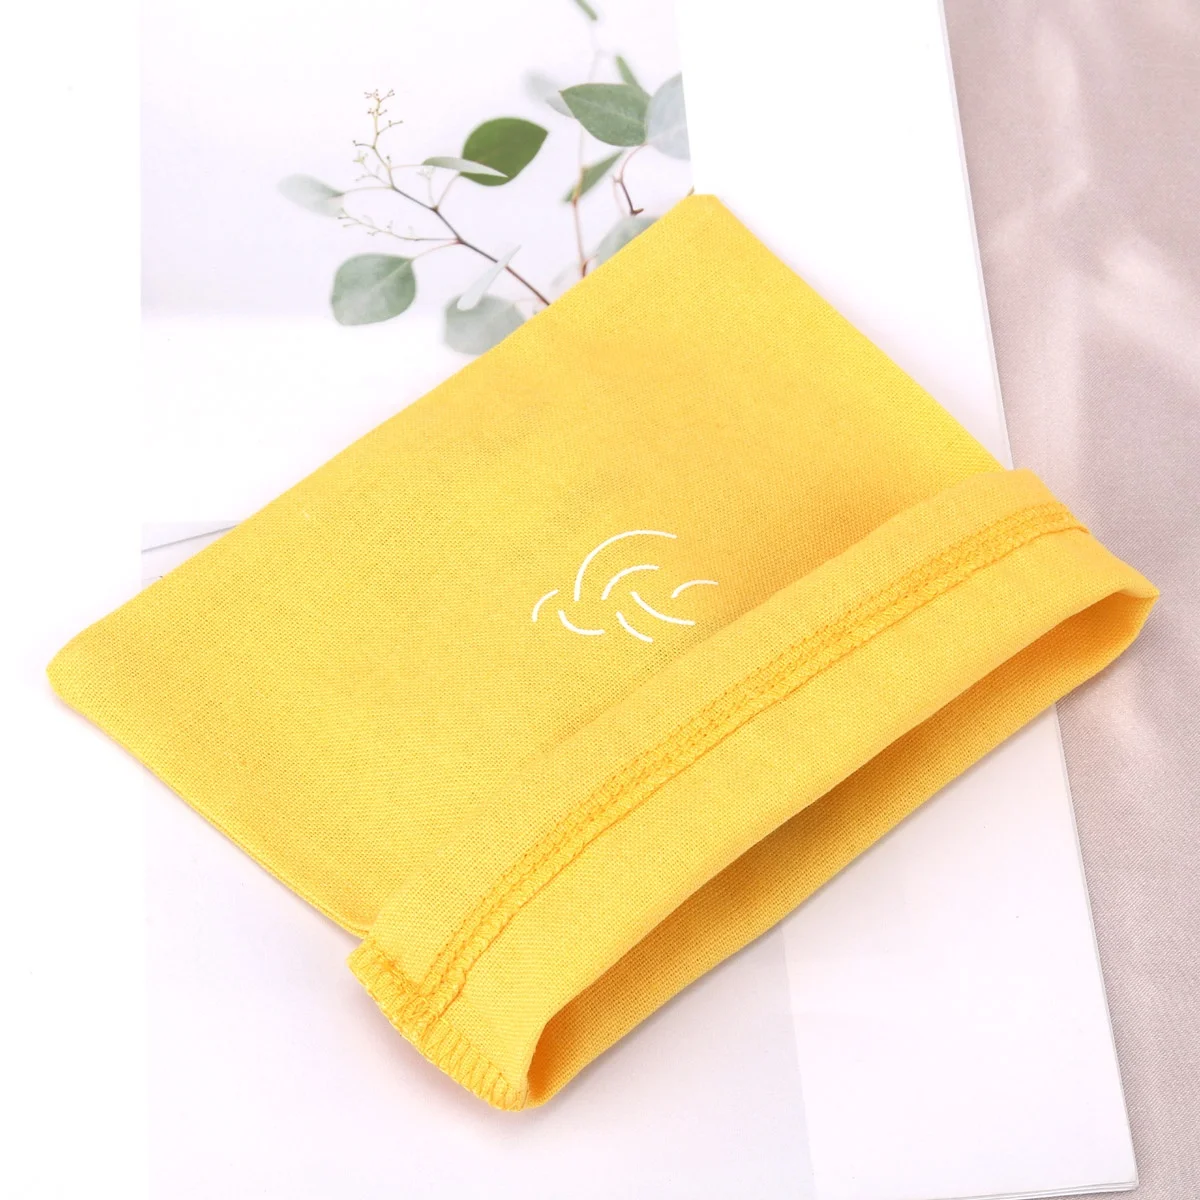 Custom Logo Printed Cotton Linen Drawstring Bag Recyclable Muslin Gift Cosmetic Jewelry Packaging Pouch